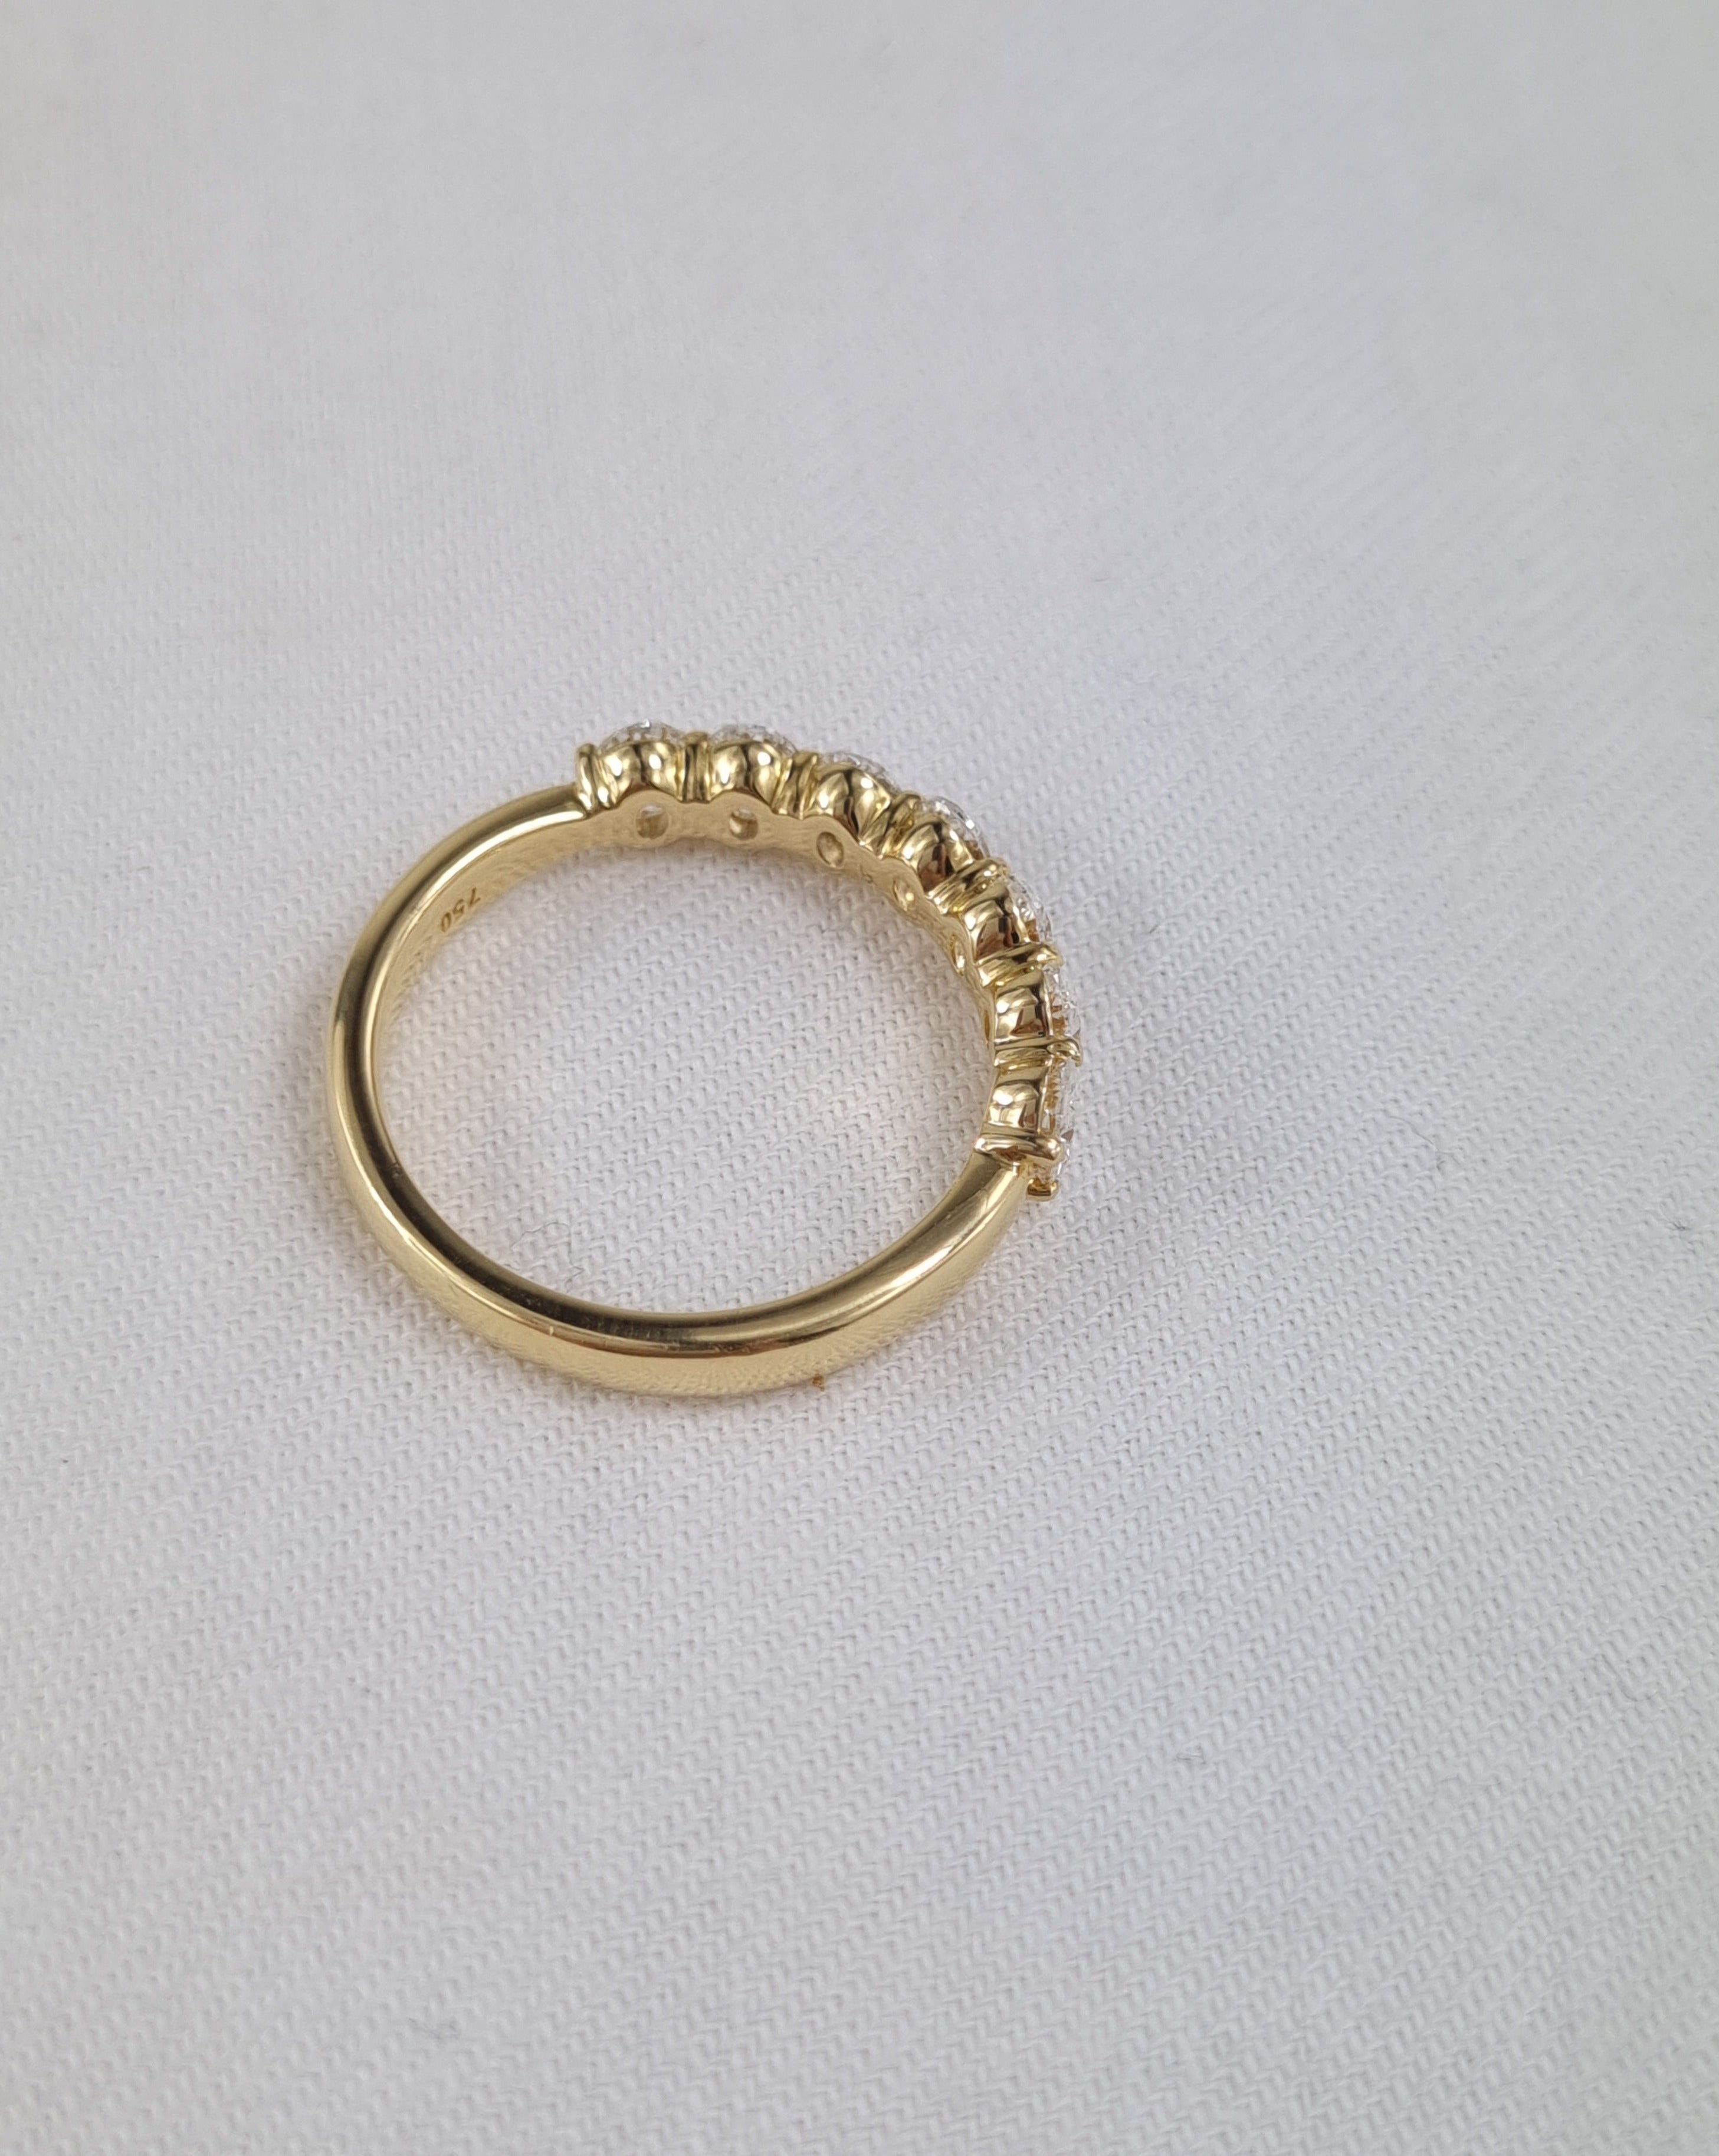 18ct Yellow Gold Oval Diamond band, 1.35ct total